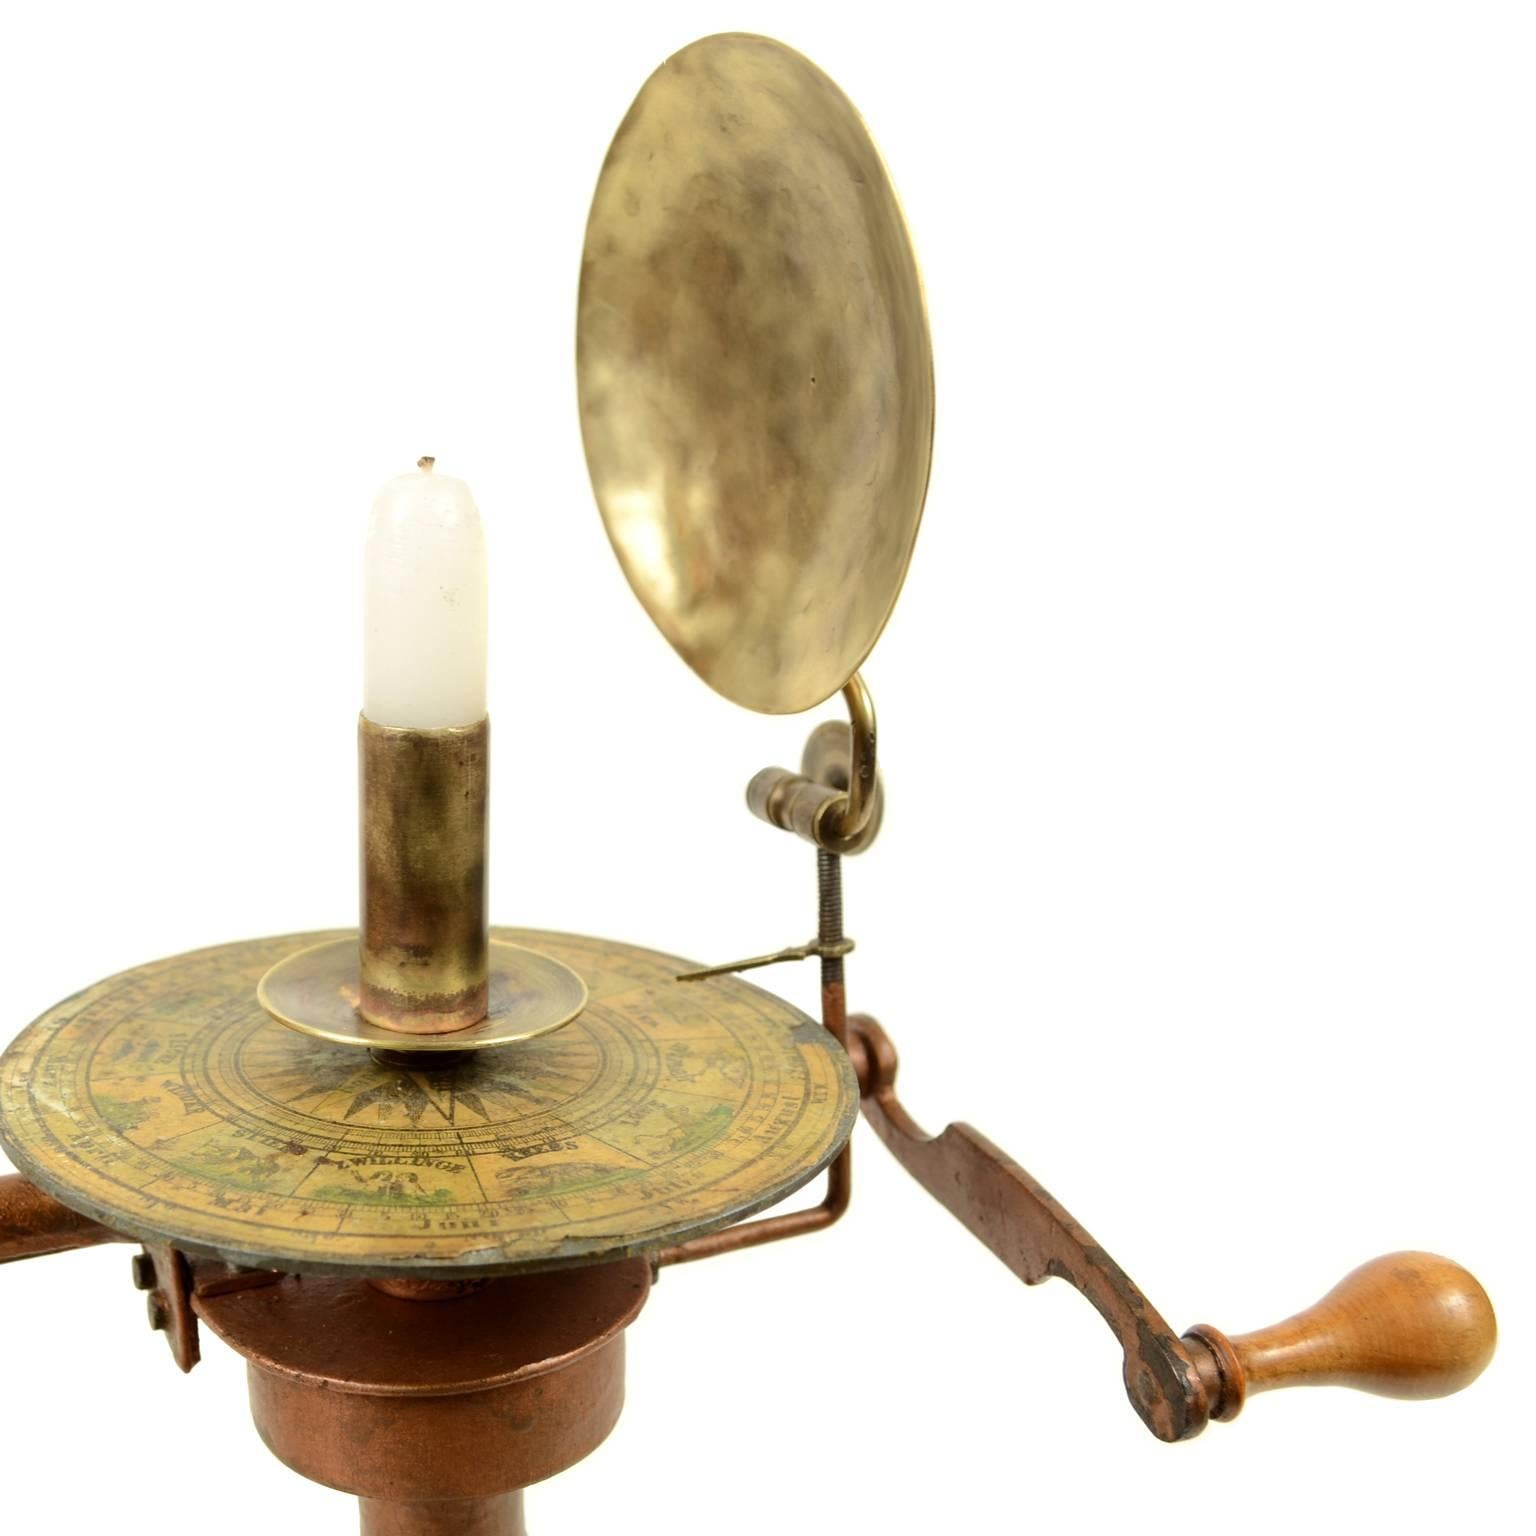 Antique Brass Czech Orrery Astronomical Instruments Made by Jan Felkl in 1870 In Good Condition For Sale In Milan, IT